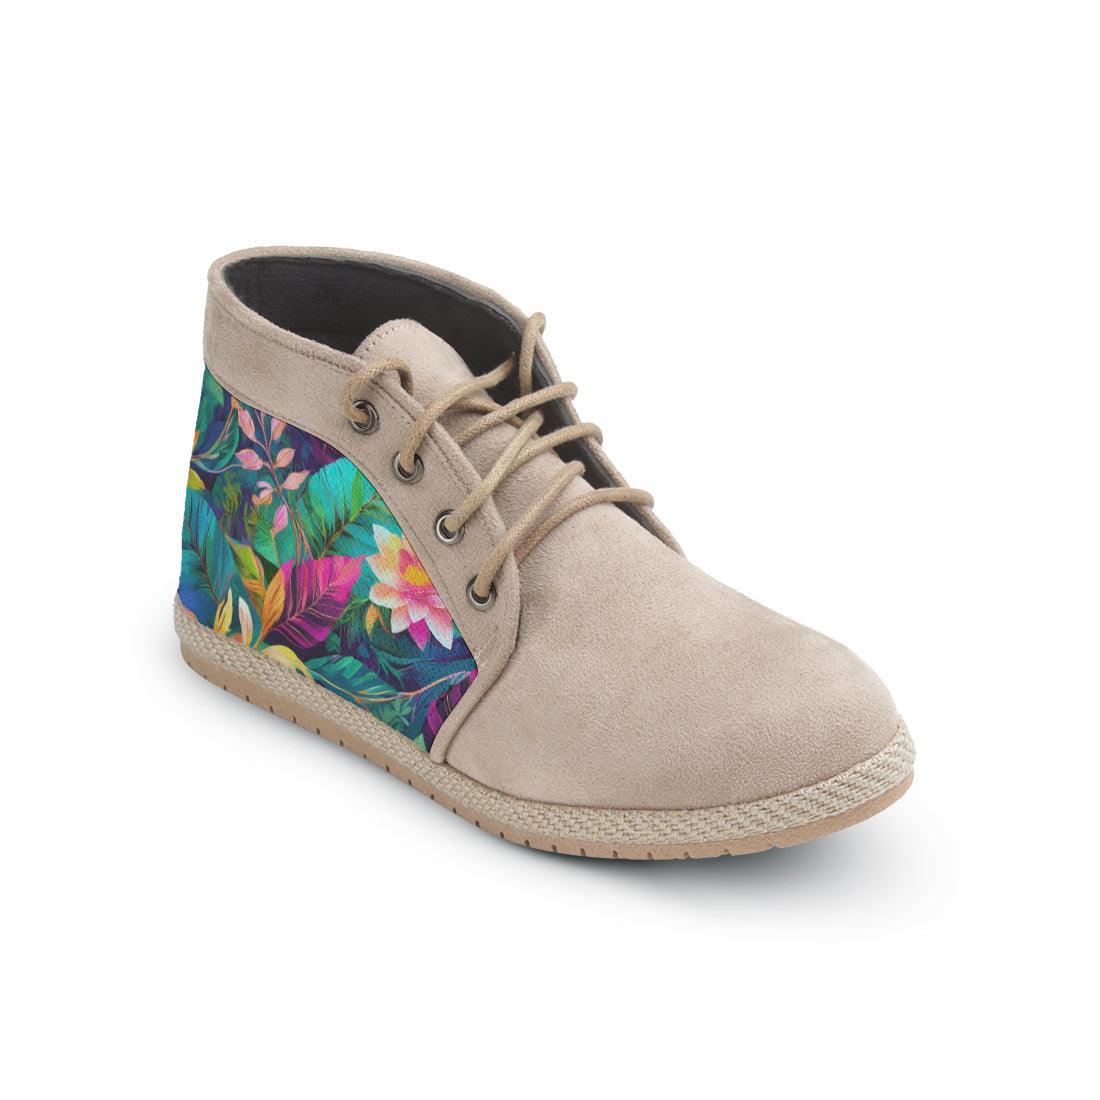 Voyage Bootie floral - CANVAEGYPT